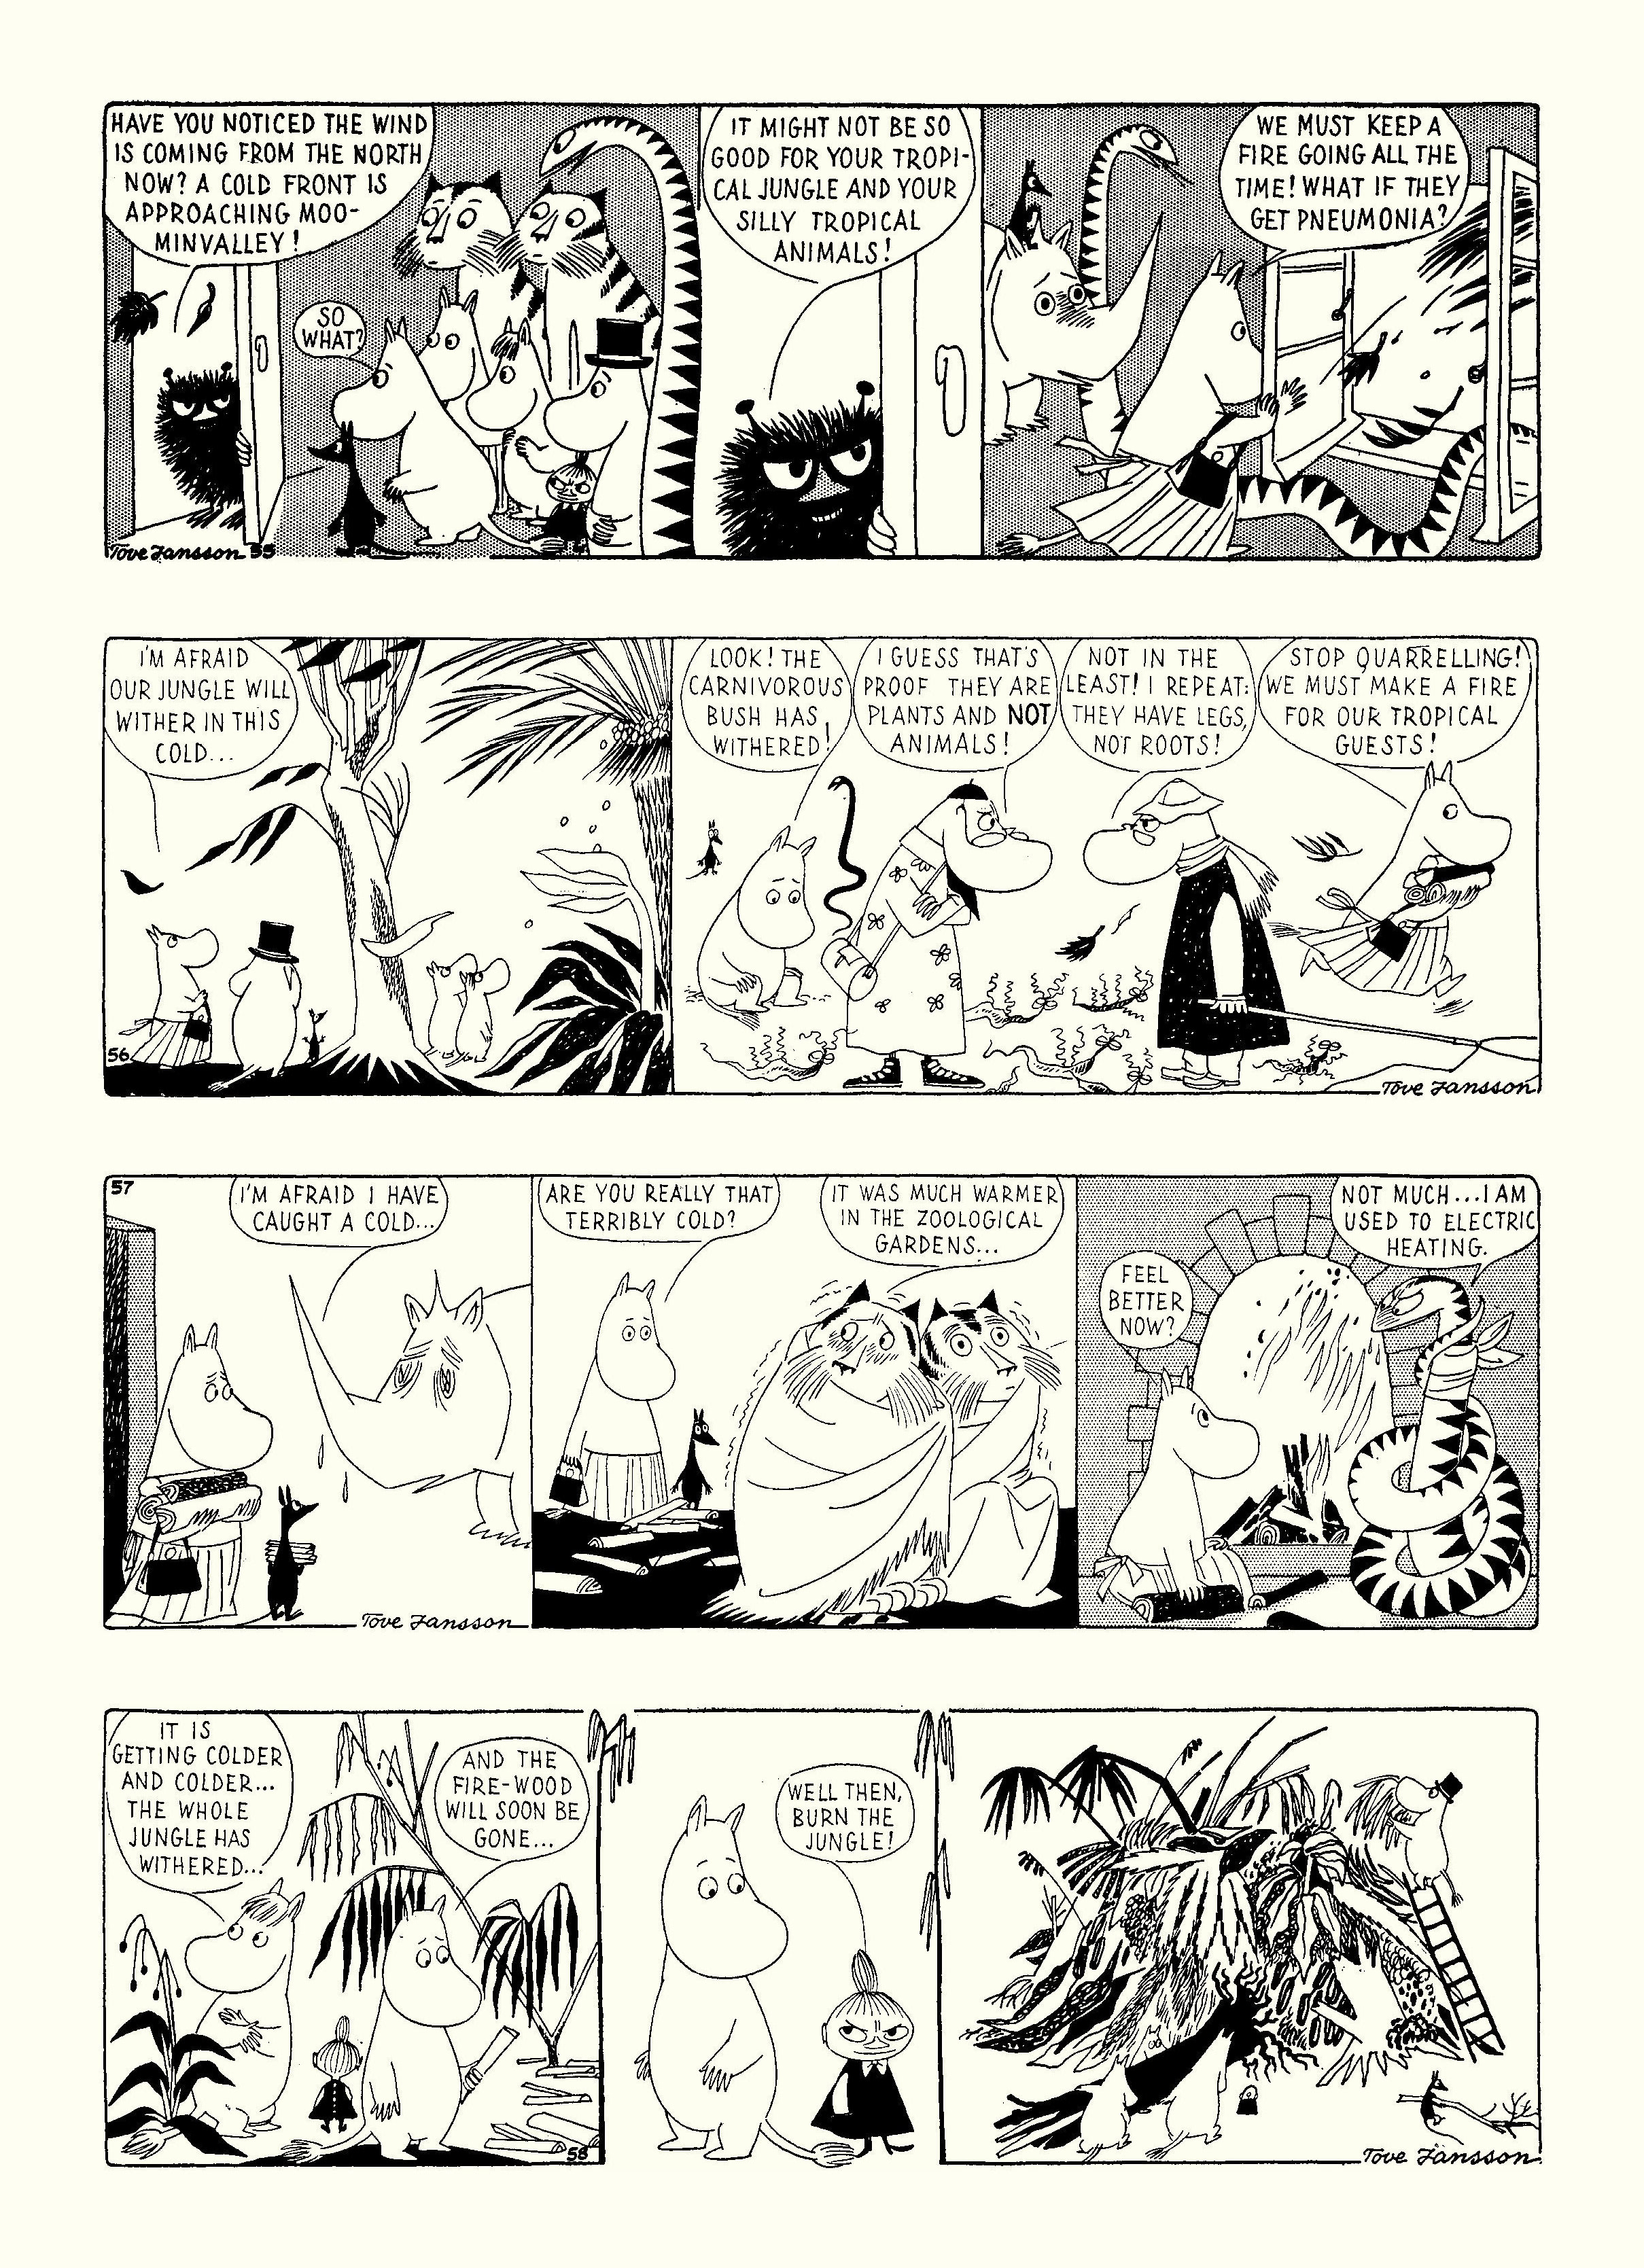 Read online Moomin: The Complete Tove Jansson Comic Strip comic -  Issue # TPB 3 - 34